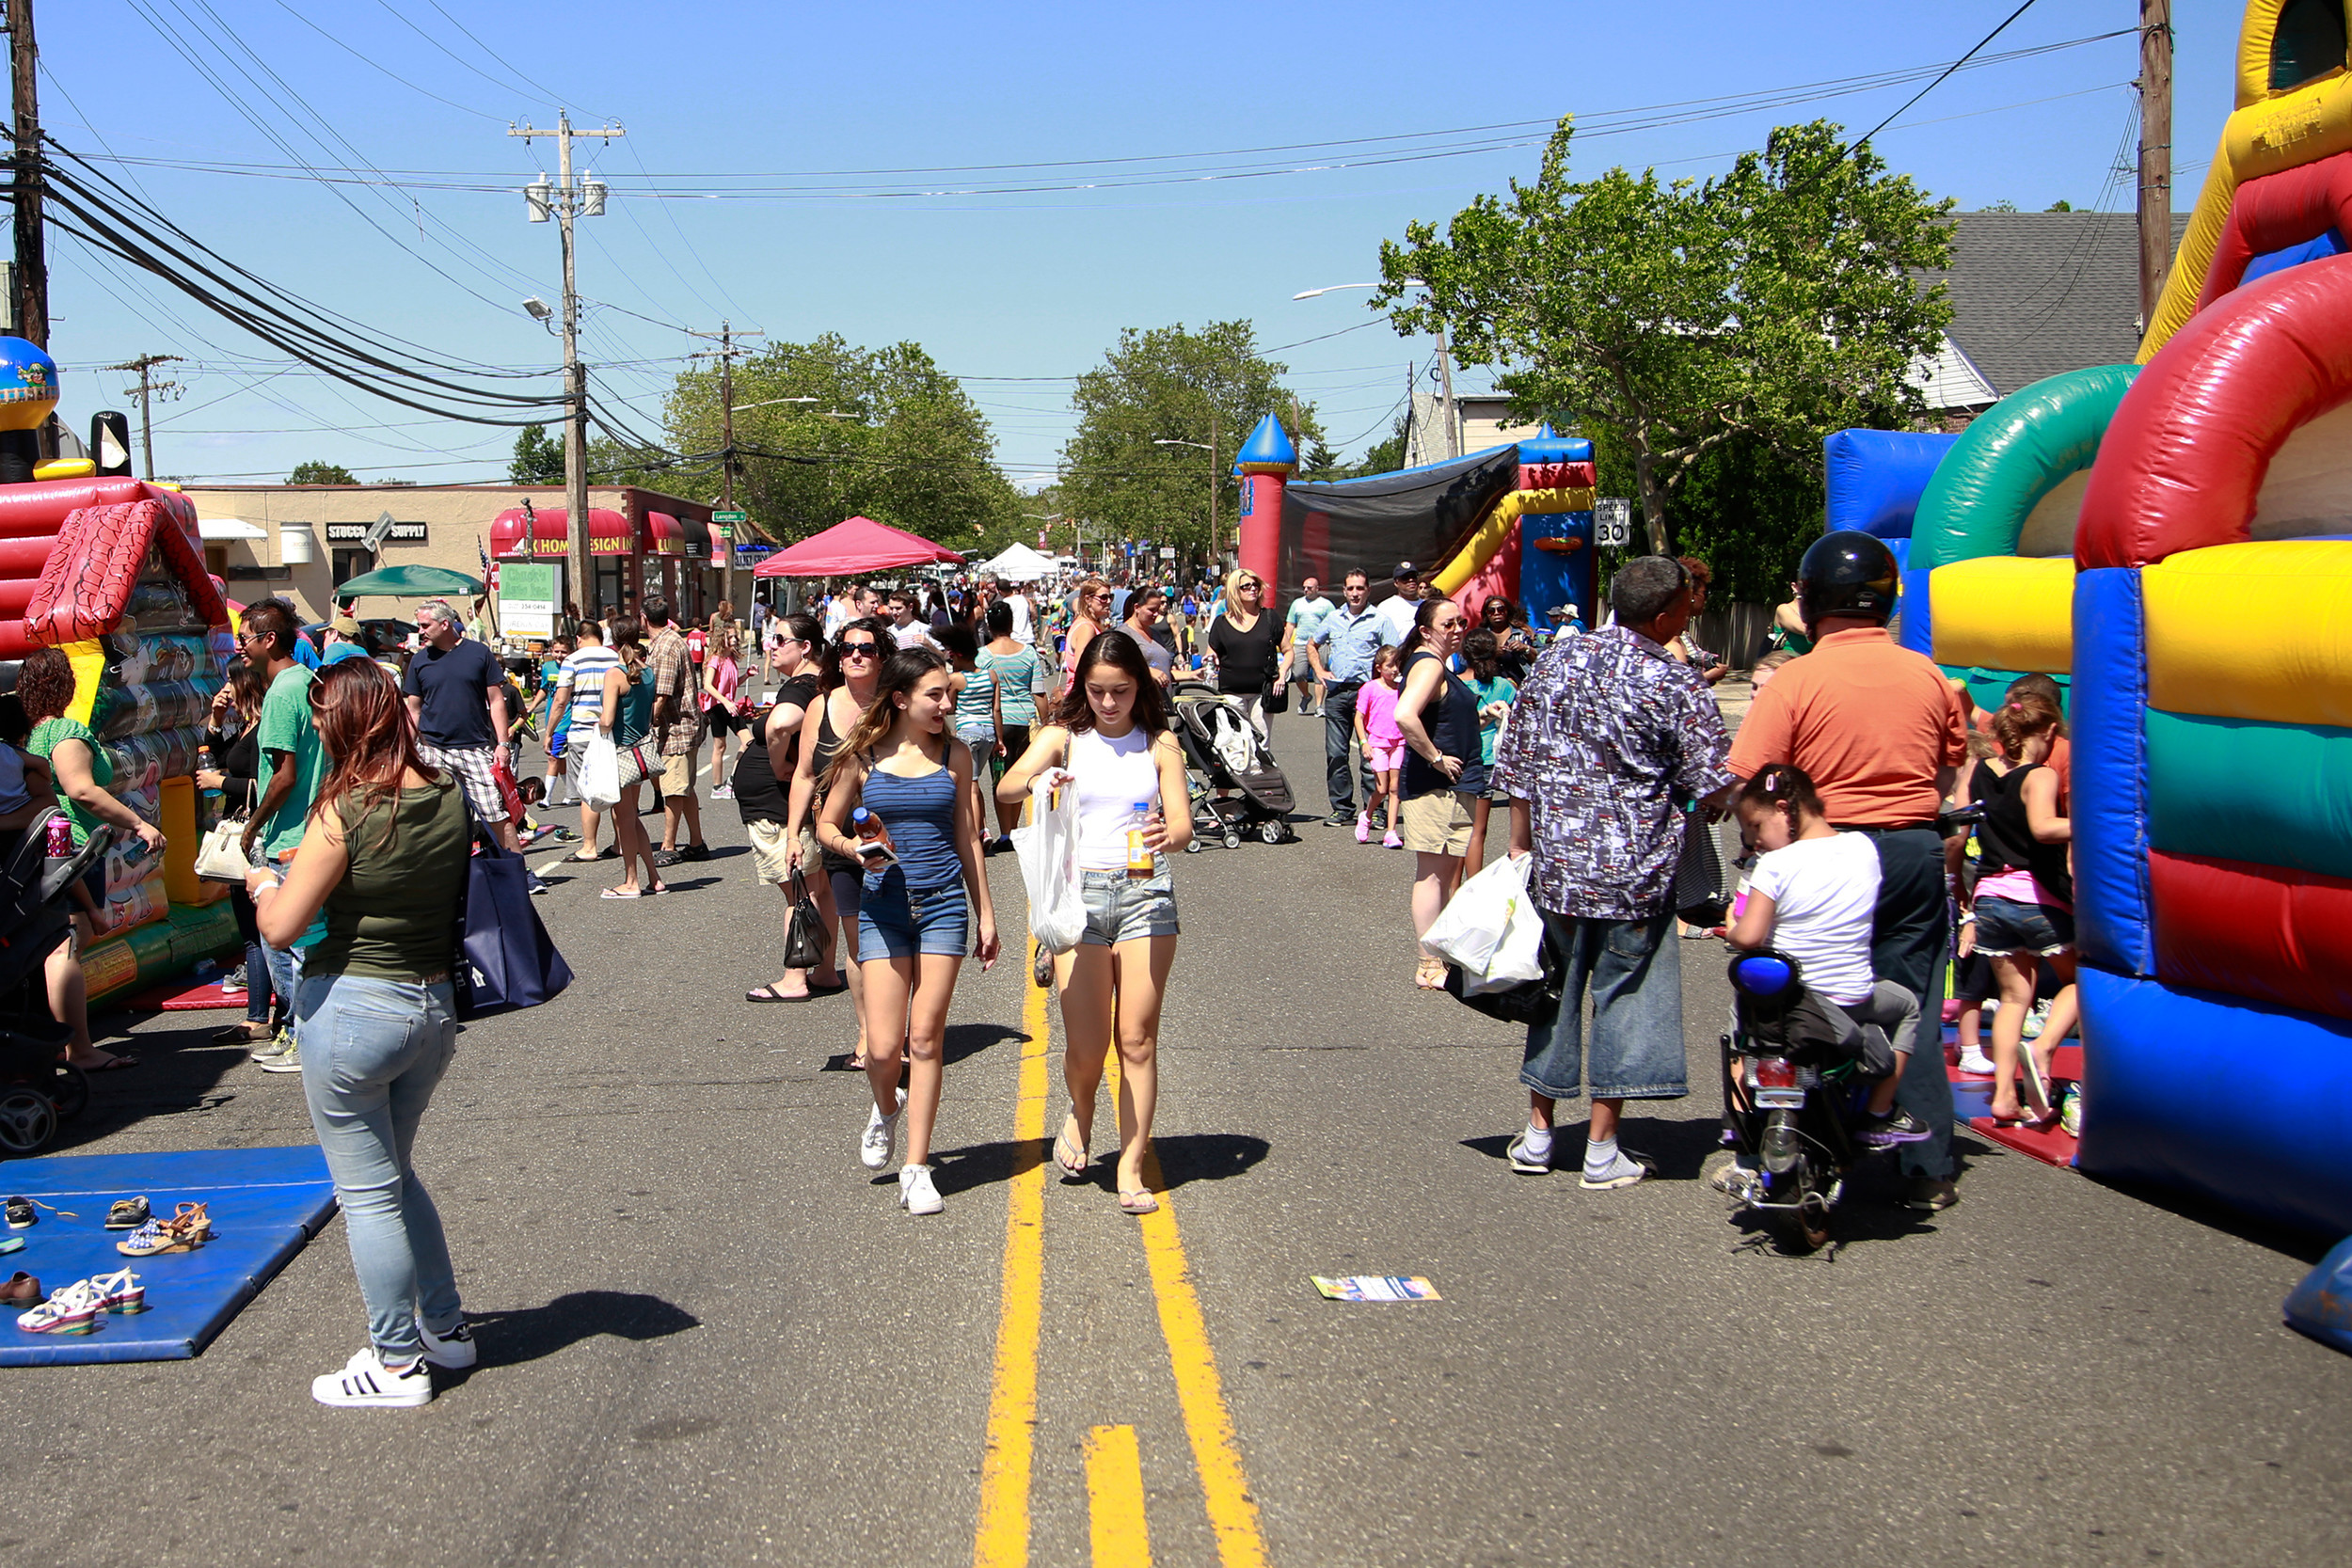 The Franklin Square street fair, hosted by Kiwanis club, raised money to donate to St. Catherine of Sienna every year.